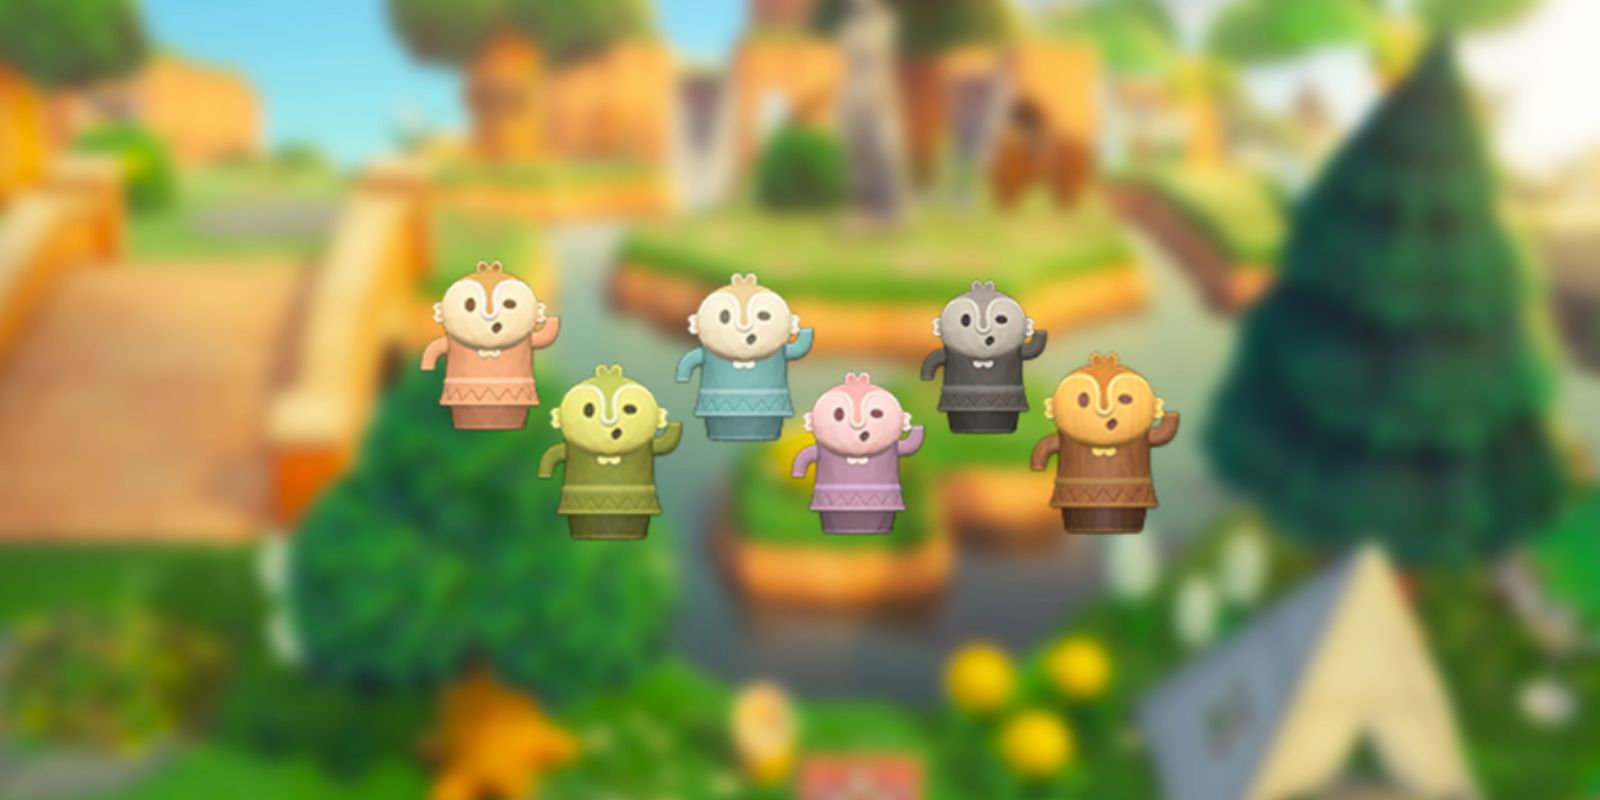 All New Gyroids In Animal Crossing 2.0 boioingoids